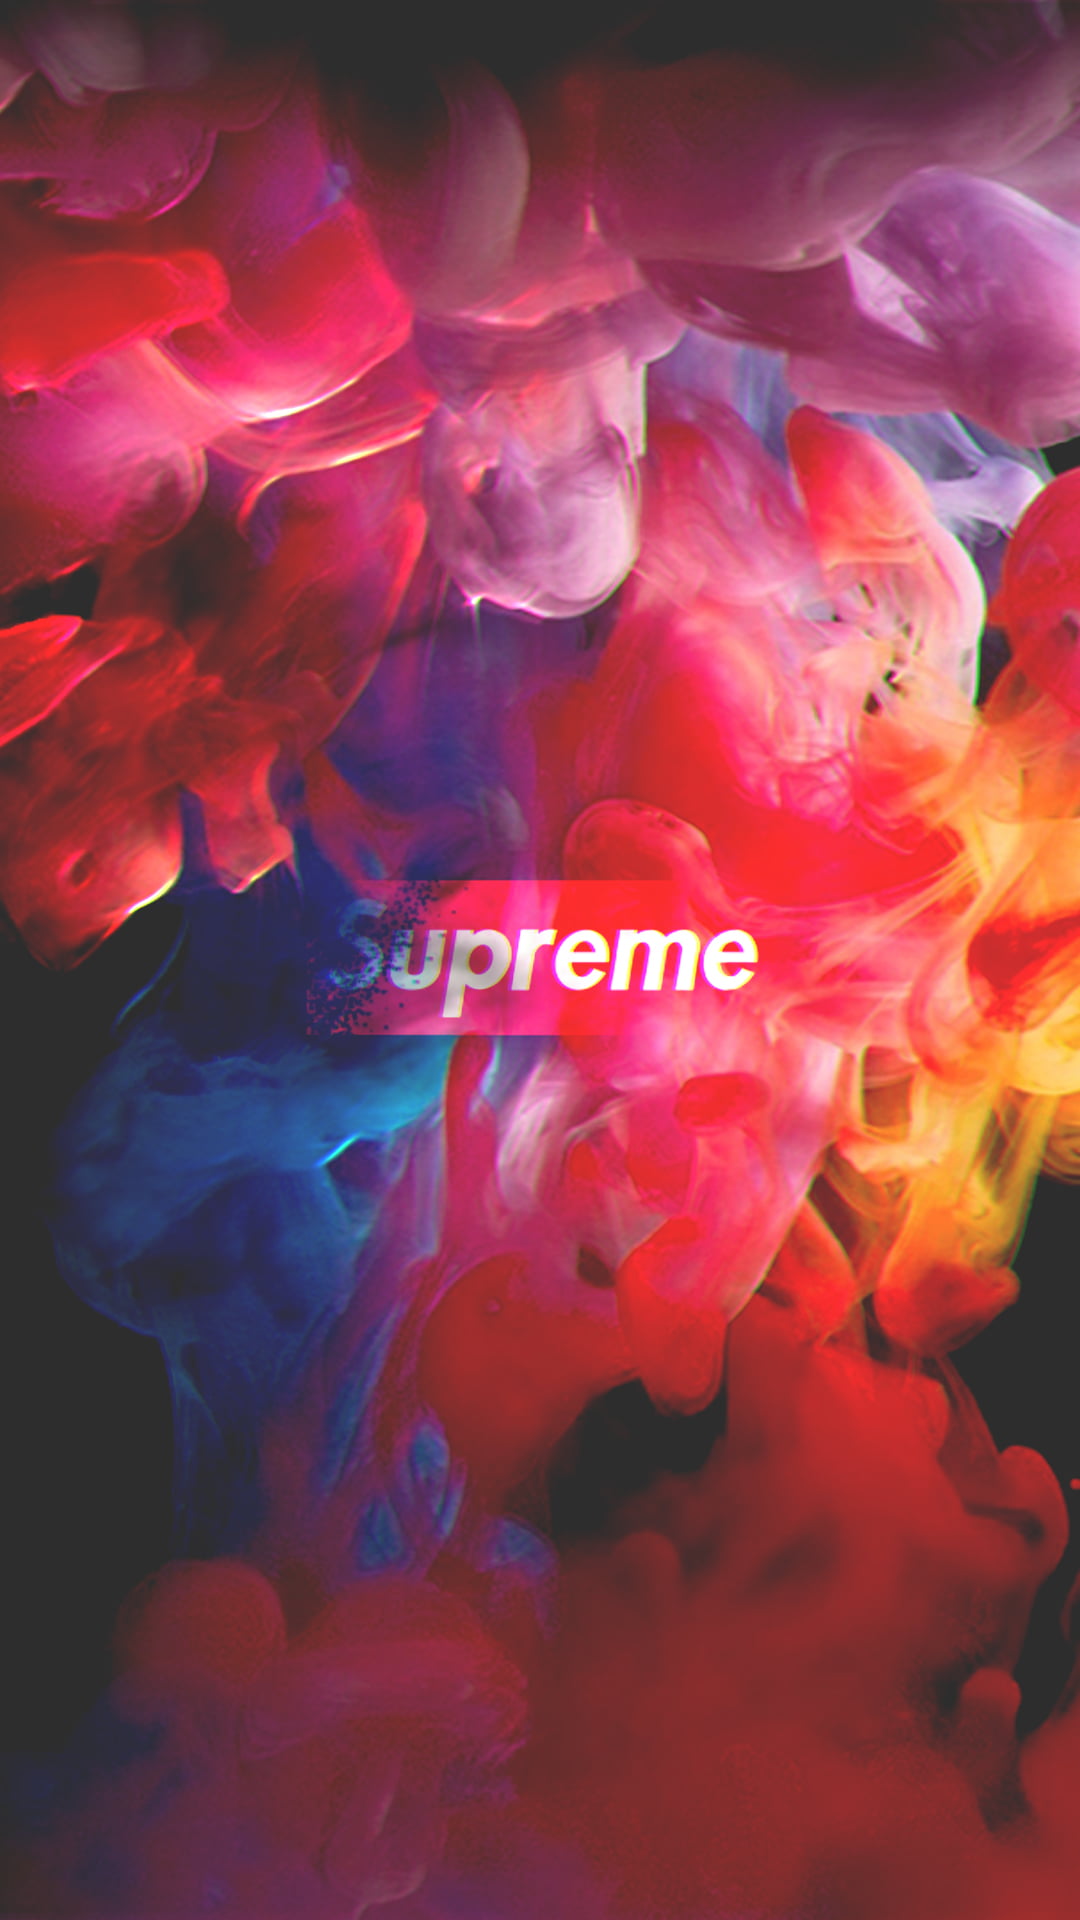 Red Supreme Wallpapers  Wallpaper Cave